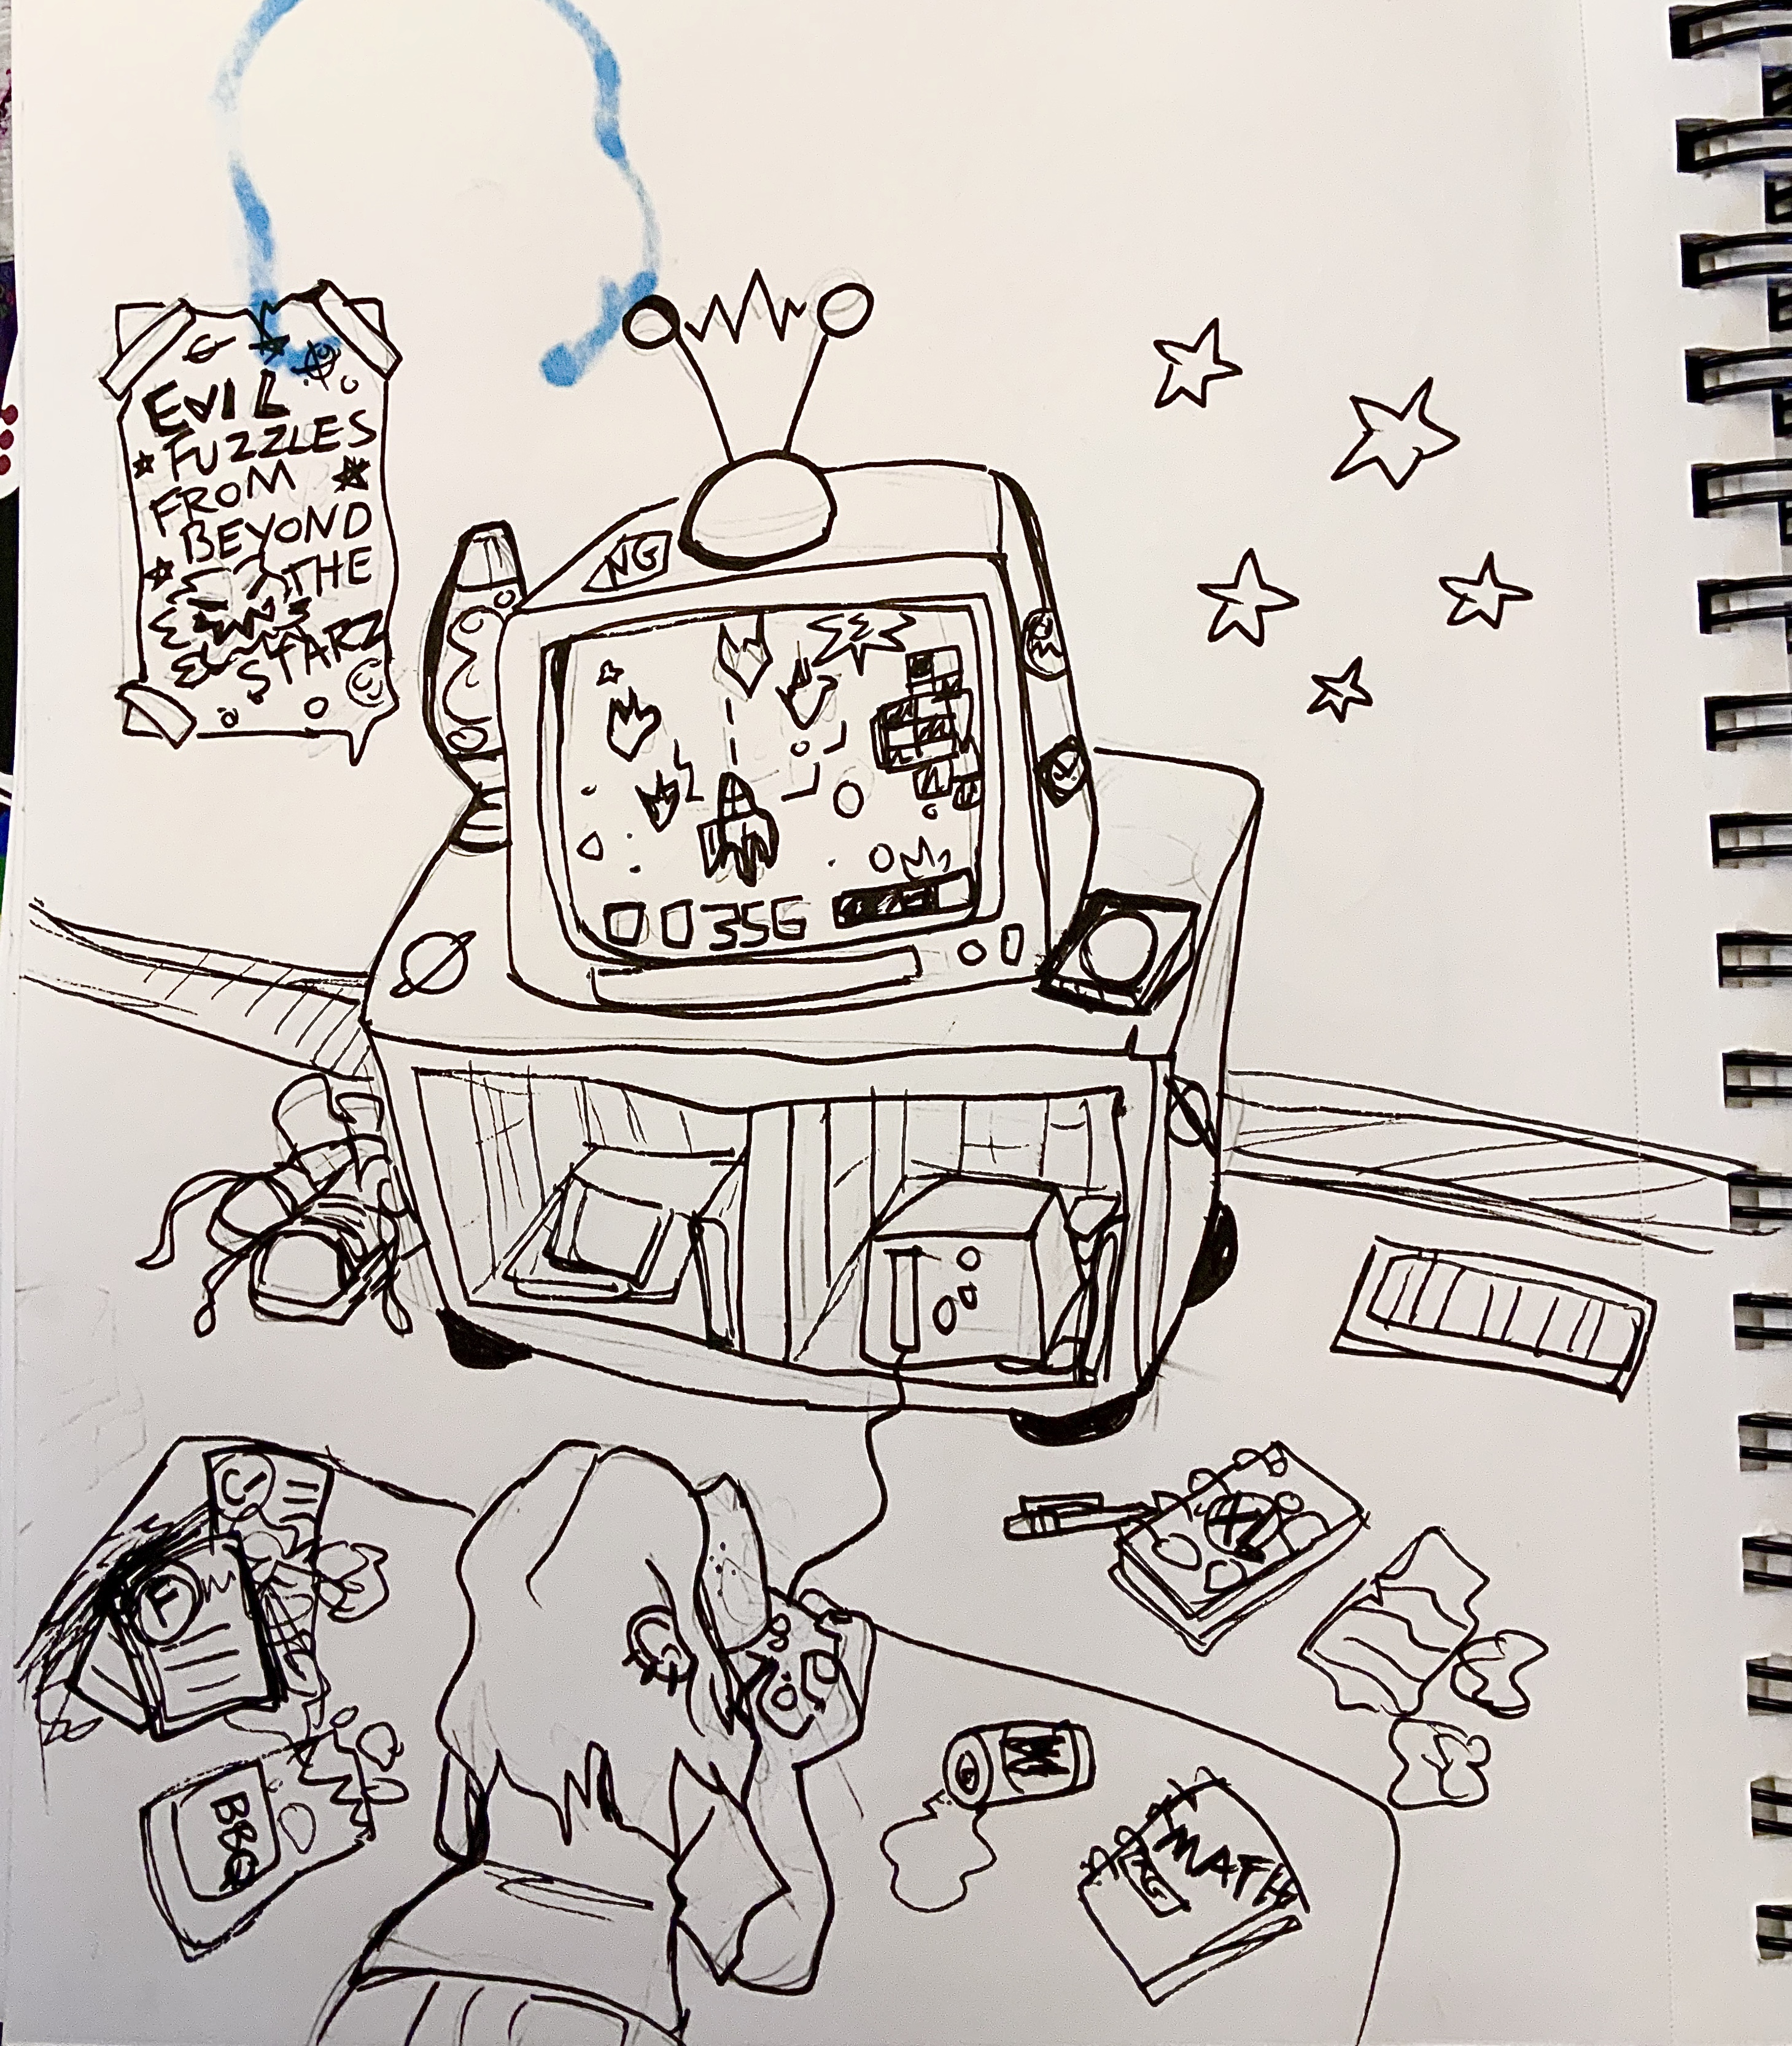 Pen drawing of Kelly playing video games in her room, from my sketchbook